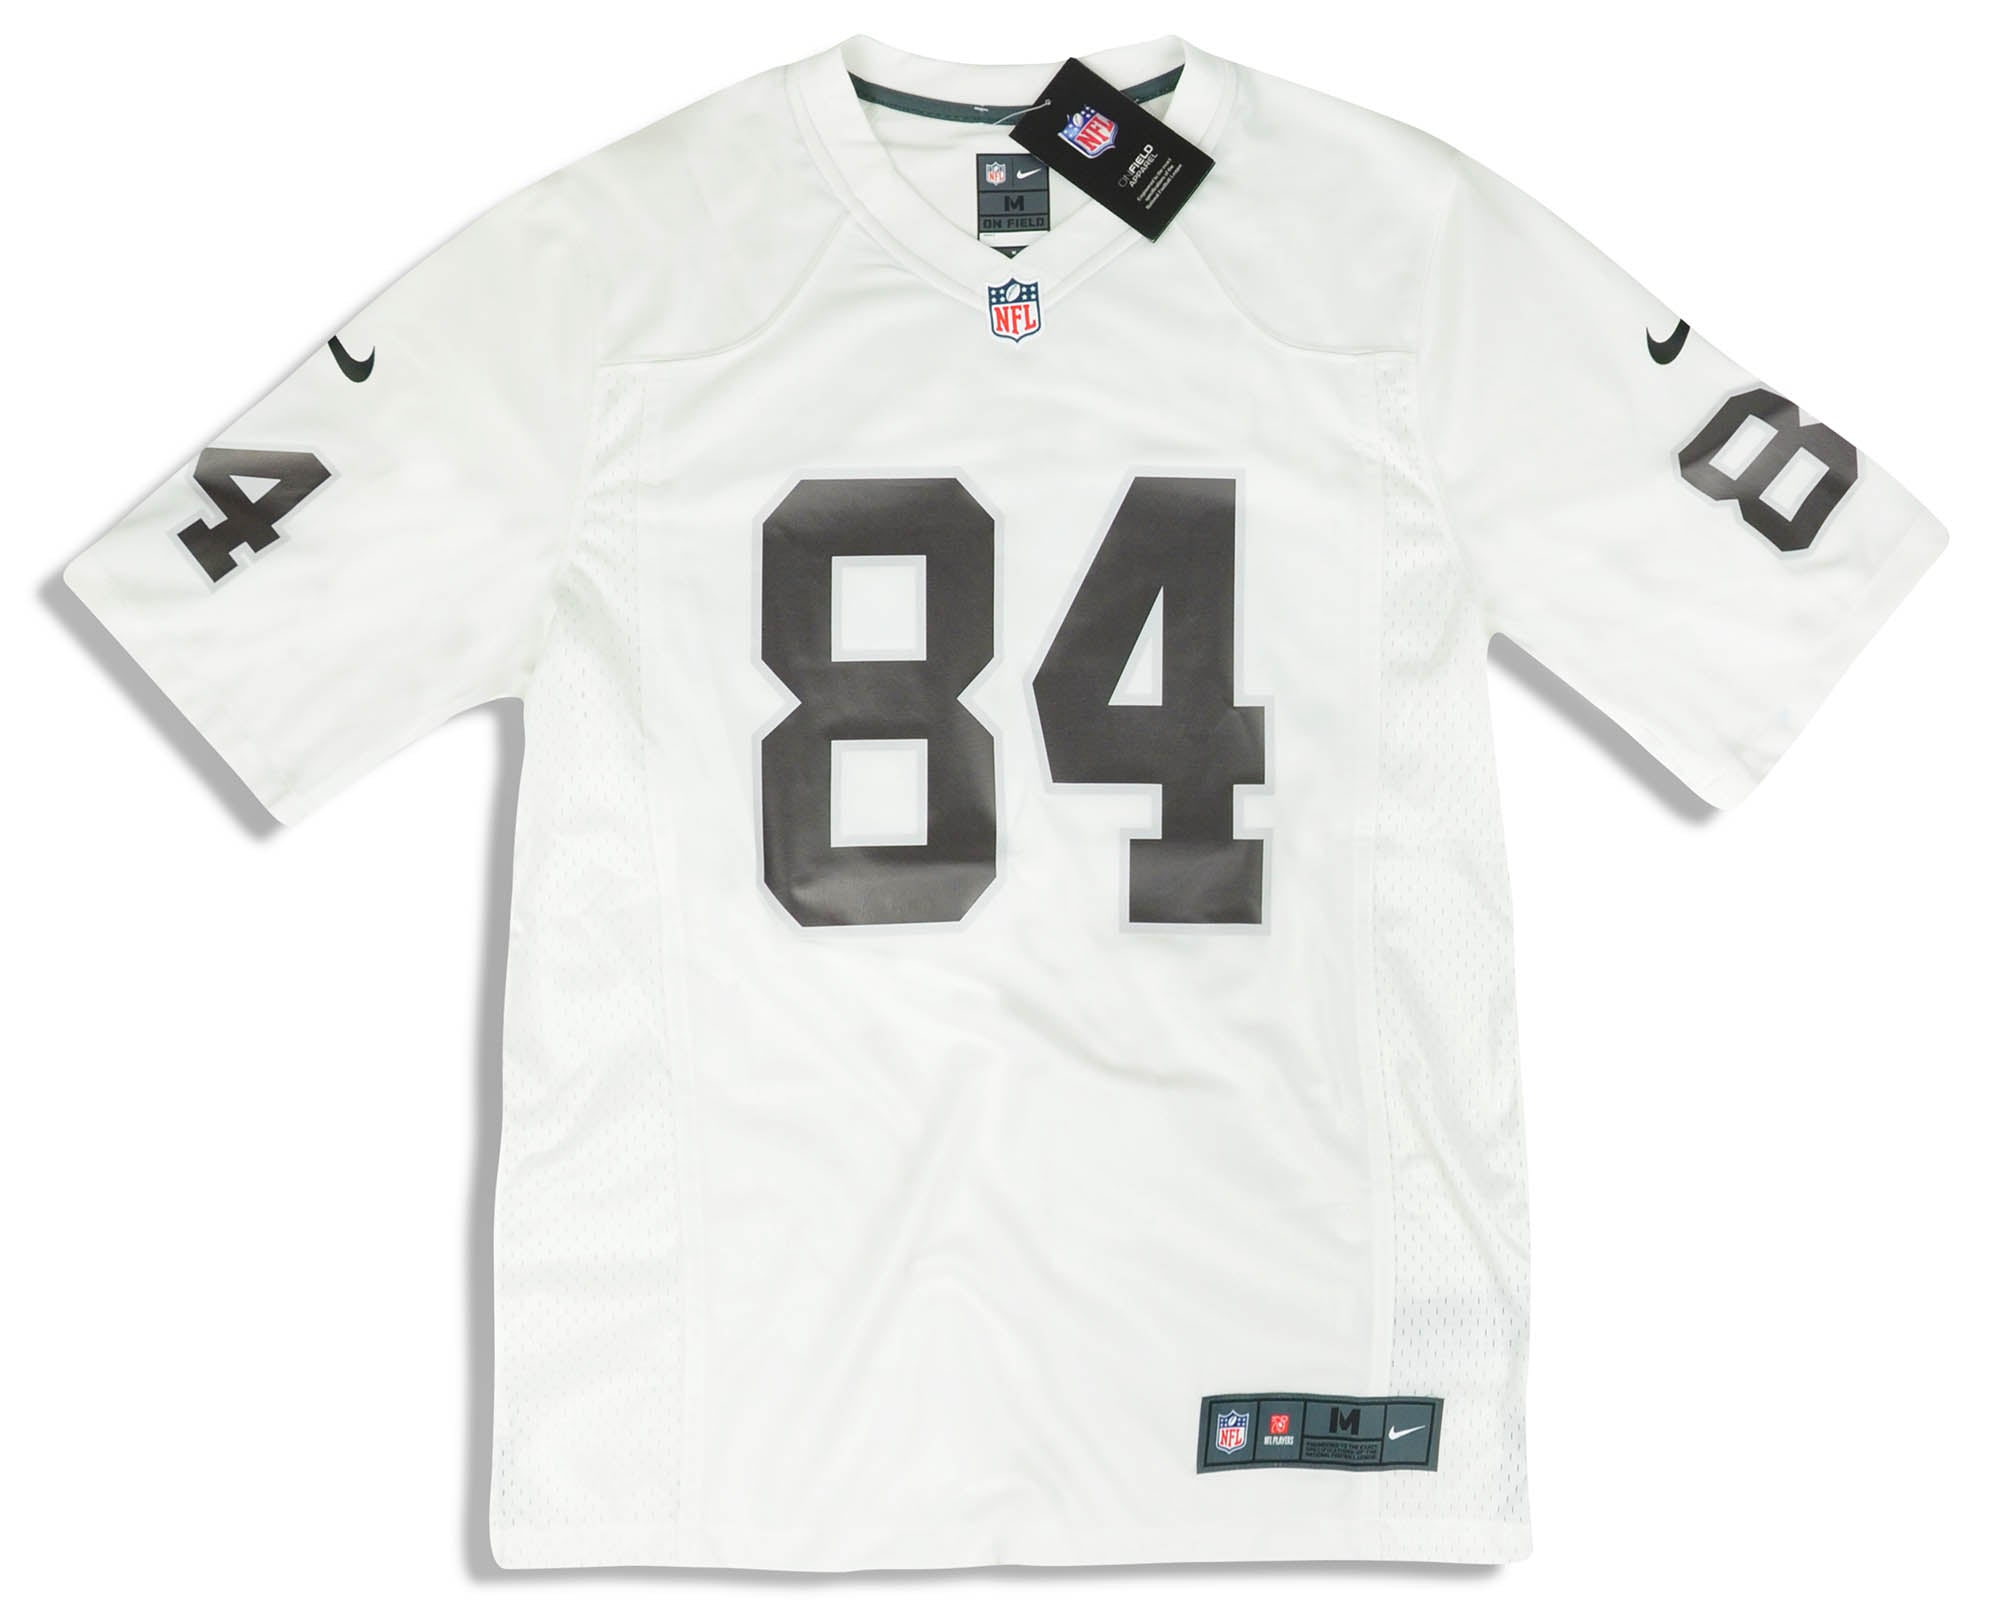 2019 OAKLAND RAIDERS BROWN #84 NIKE GAME JERSEY (AWAY) M - W/TAGS